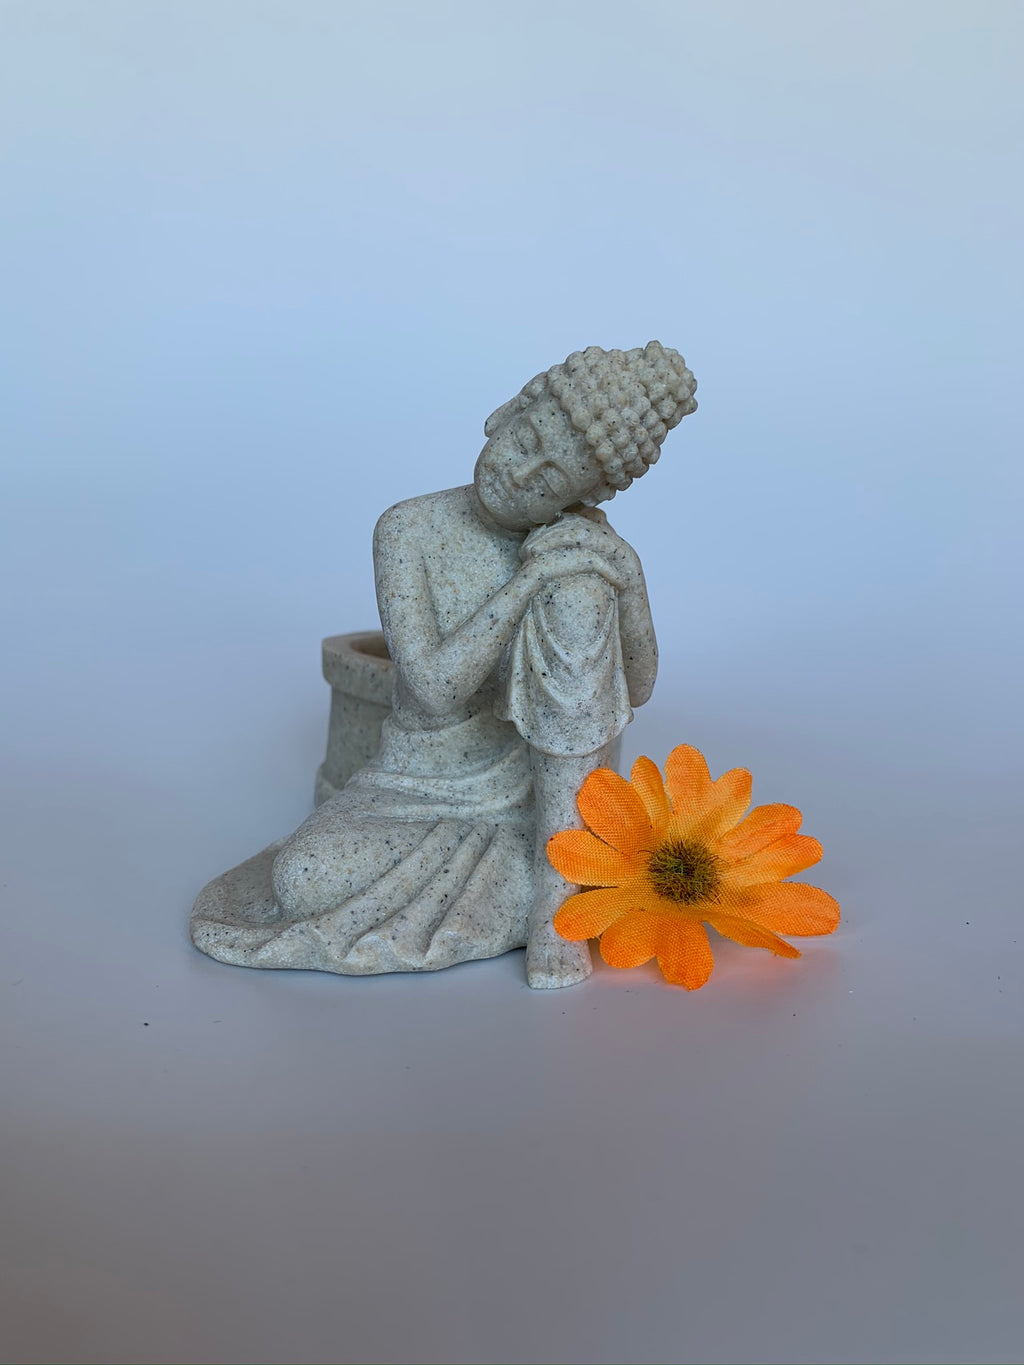 Beautiful sandstone Buddha candle holder - a welcome addition to your altar, mediation space or simply to add to the décor of your home. Add a votive candle to increase the ambiance or to use as a focus during spiritual practice. Buddha is revered around the world and his teachings and actions have shown us the beauty, wonder and power of enlightenment. The term Buddha refers to the Awakened One. Size is approximately 3¼" tall.